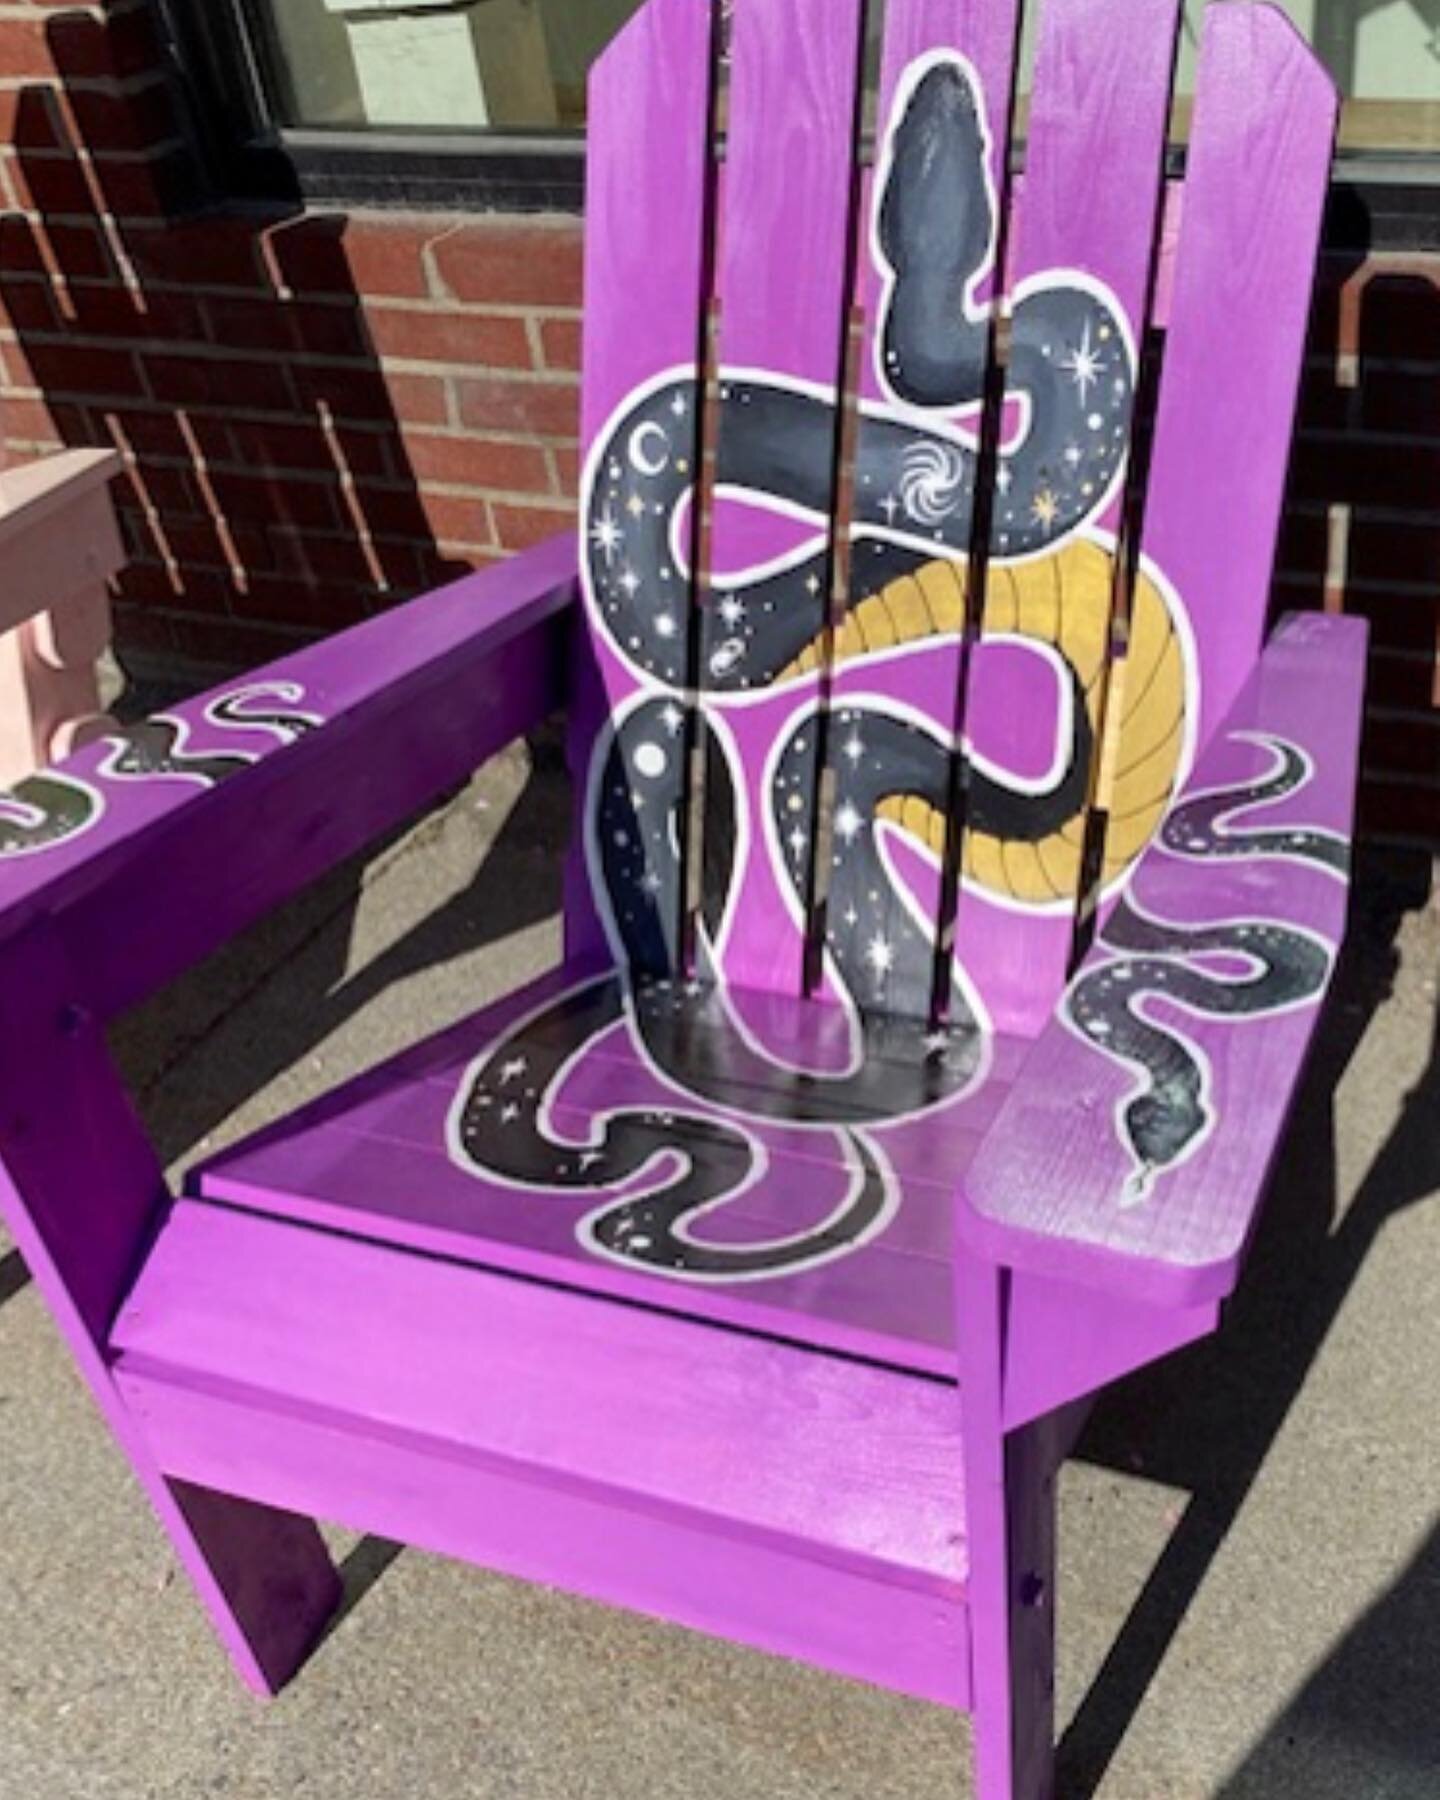 Our annual Chair-Art-Able Auction is just a few days away! Come to Rocktoberfest this Saturday, September 24, to bid on your favorite!

You may have noticed our yearly crop of painted chairs spread around downtown. These chairs are painted by communi